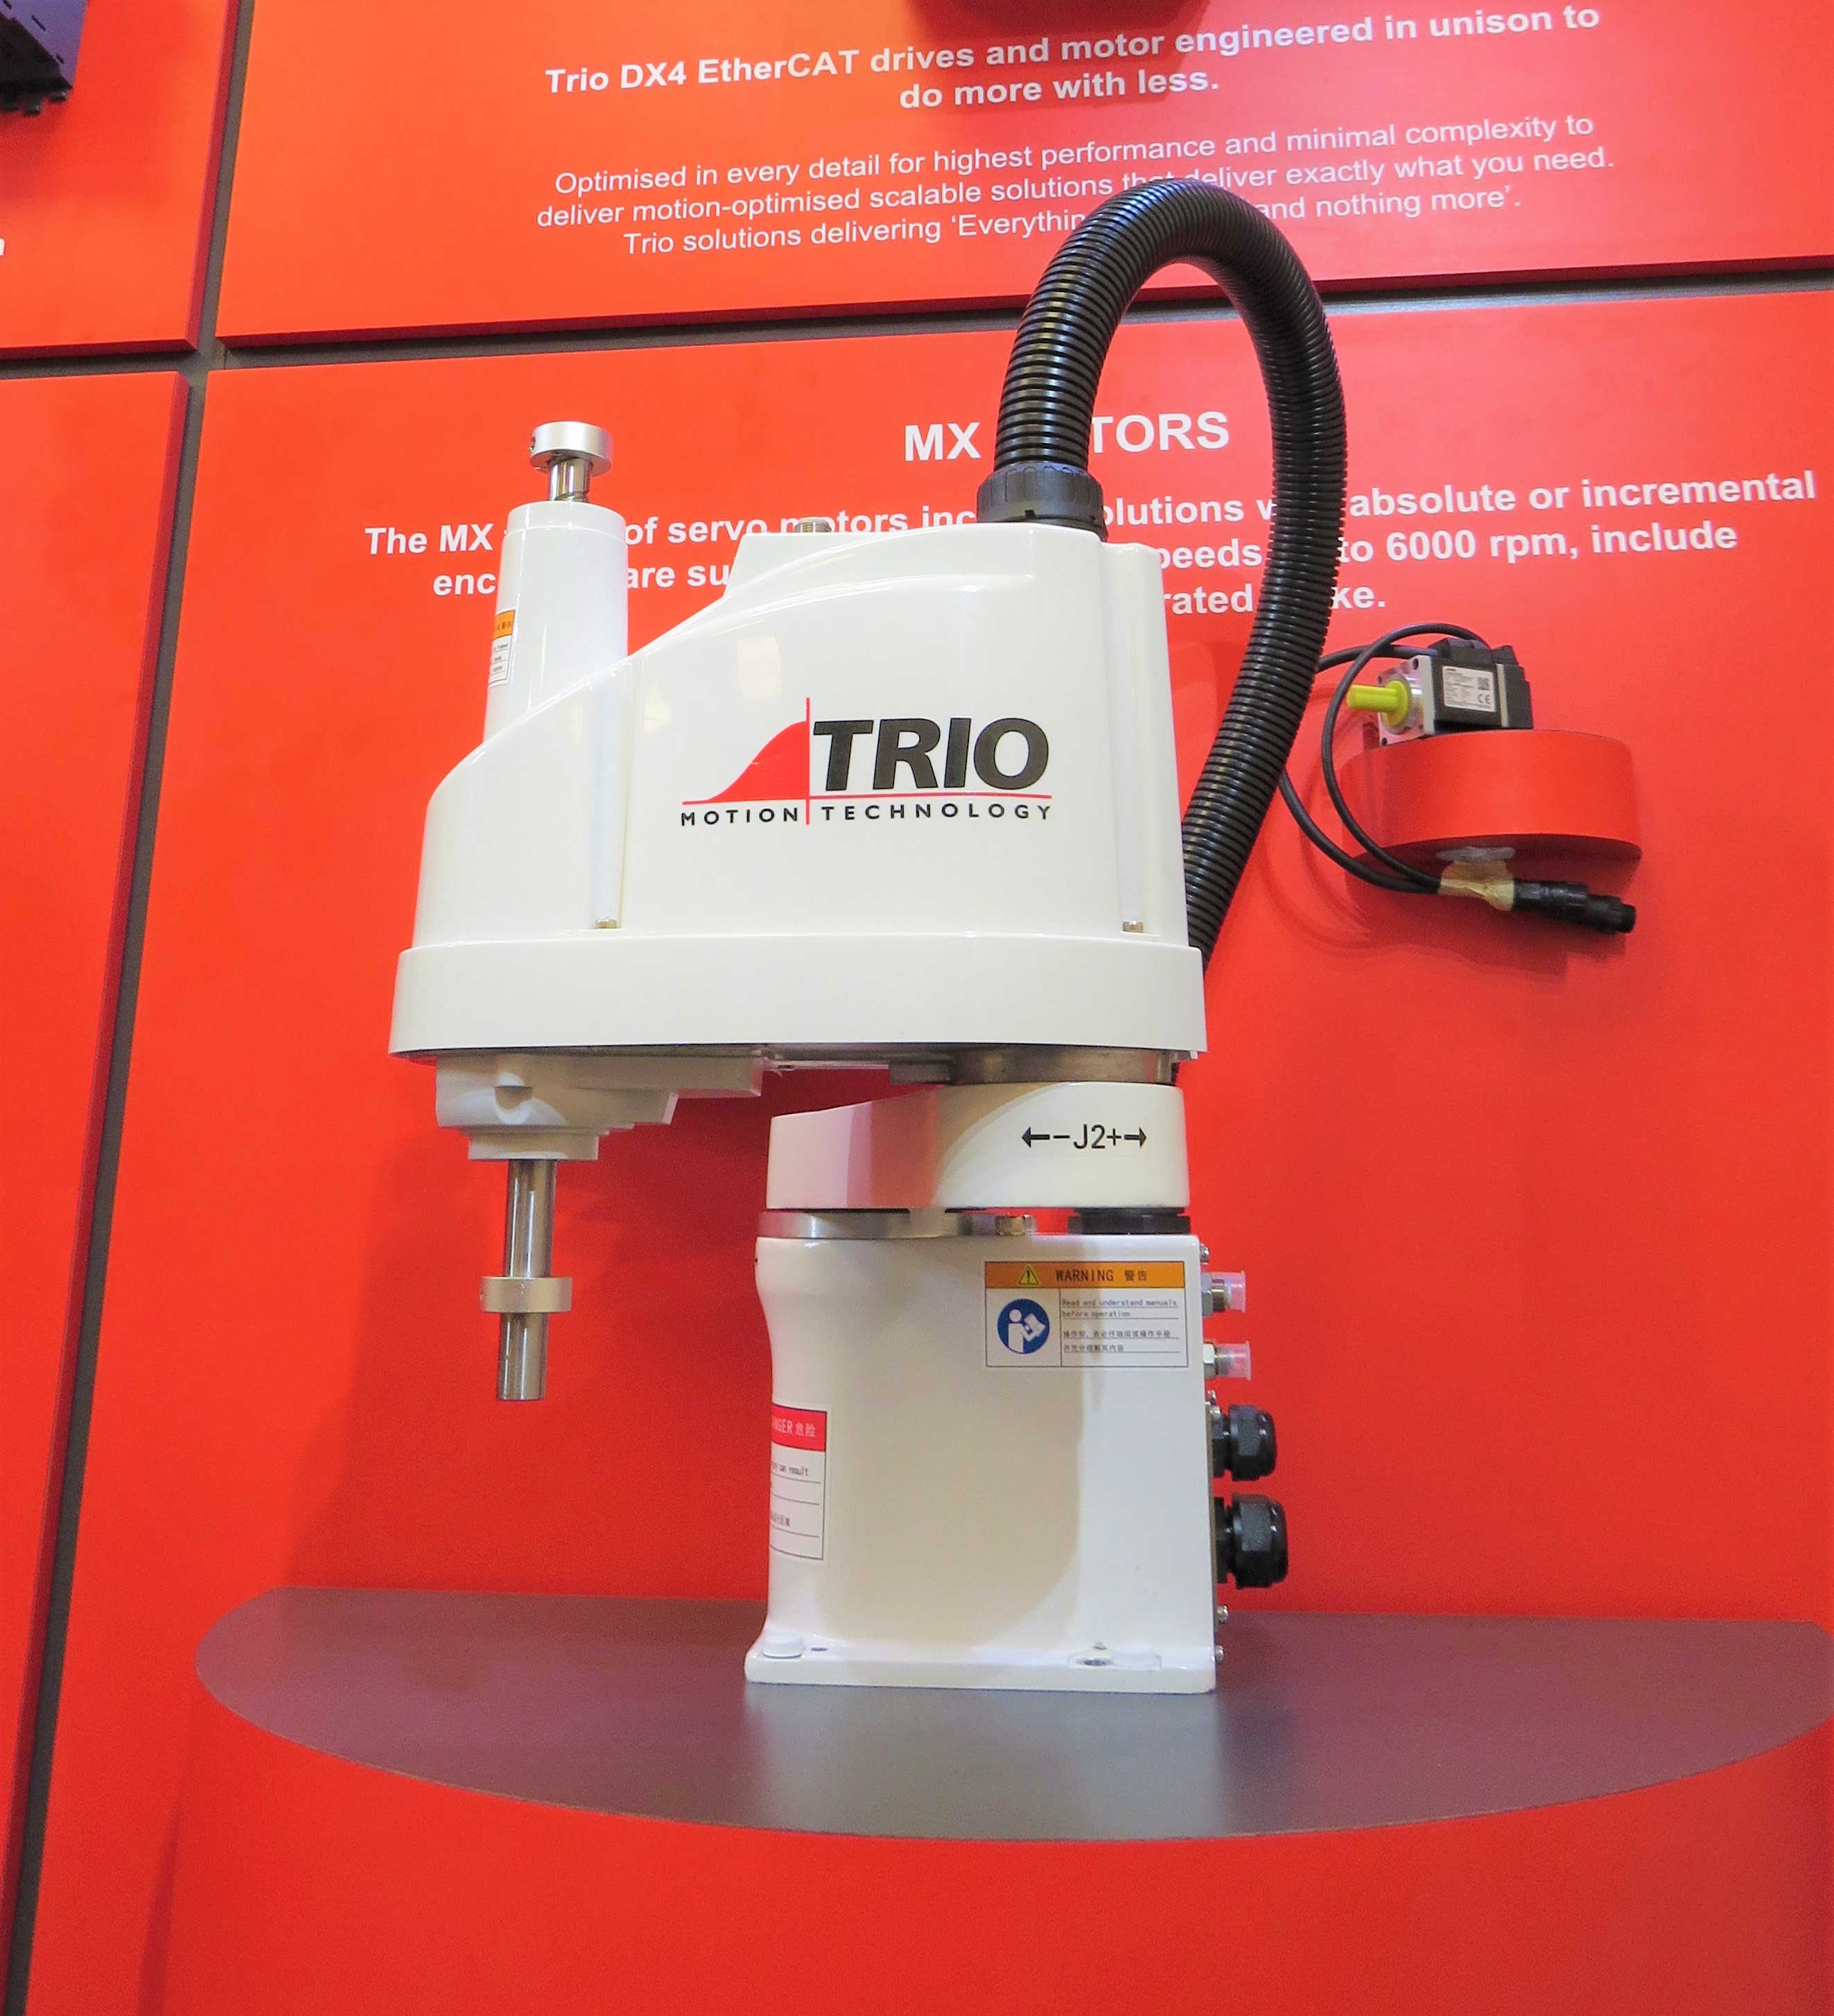 Trio’s new range of SCARA robots provide OEMs with an integrated robot, motion and machine automation capability.  